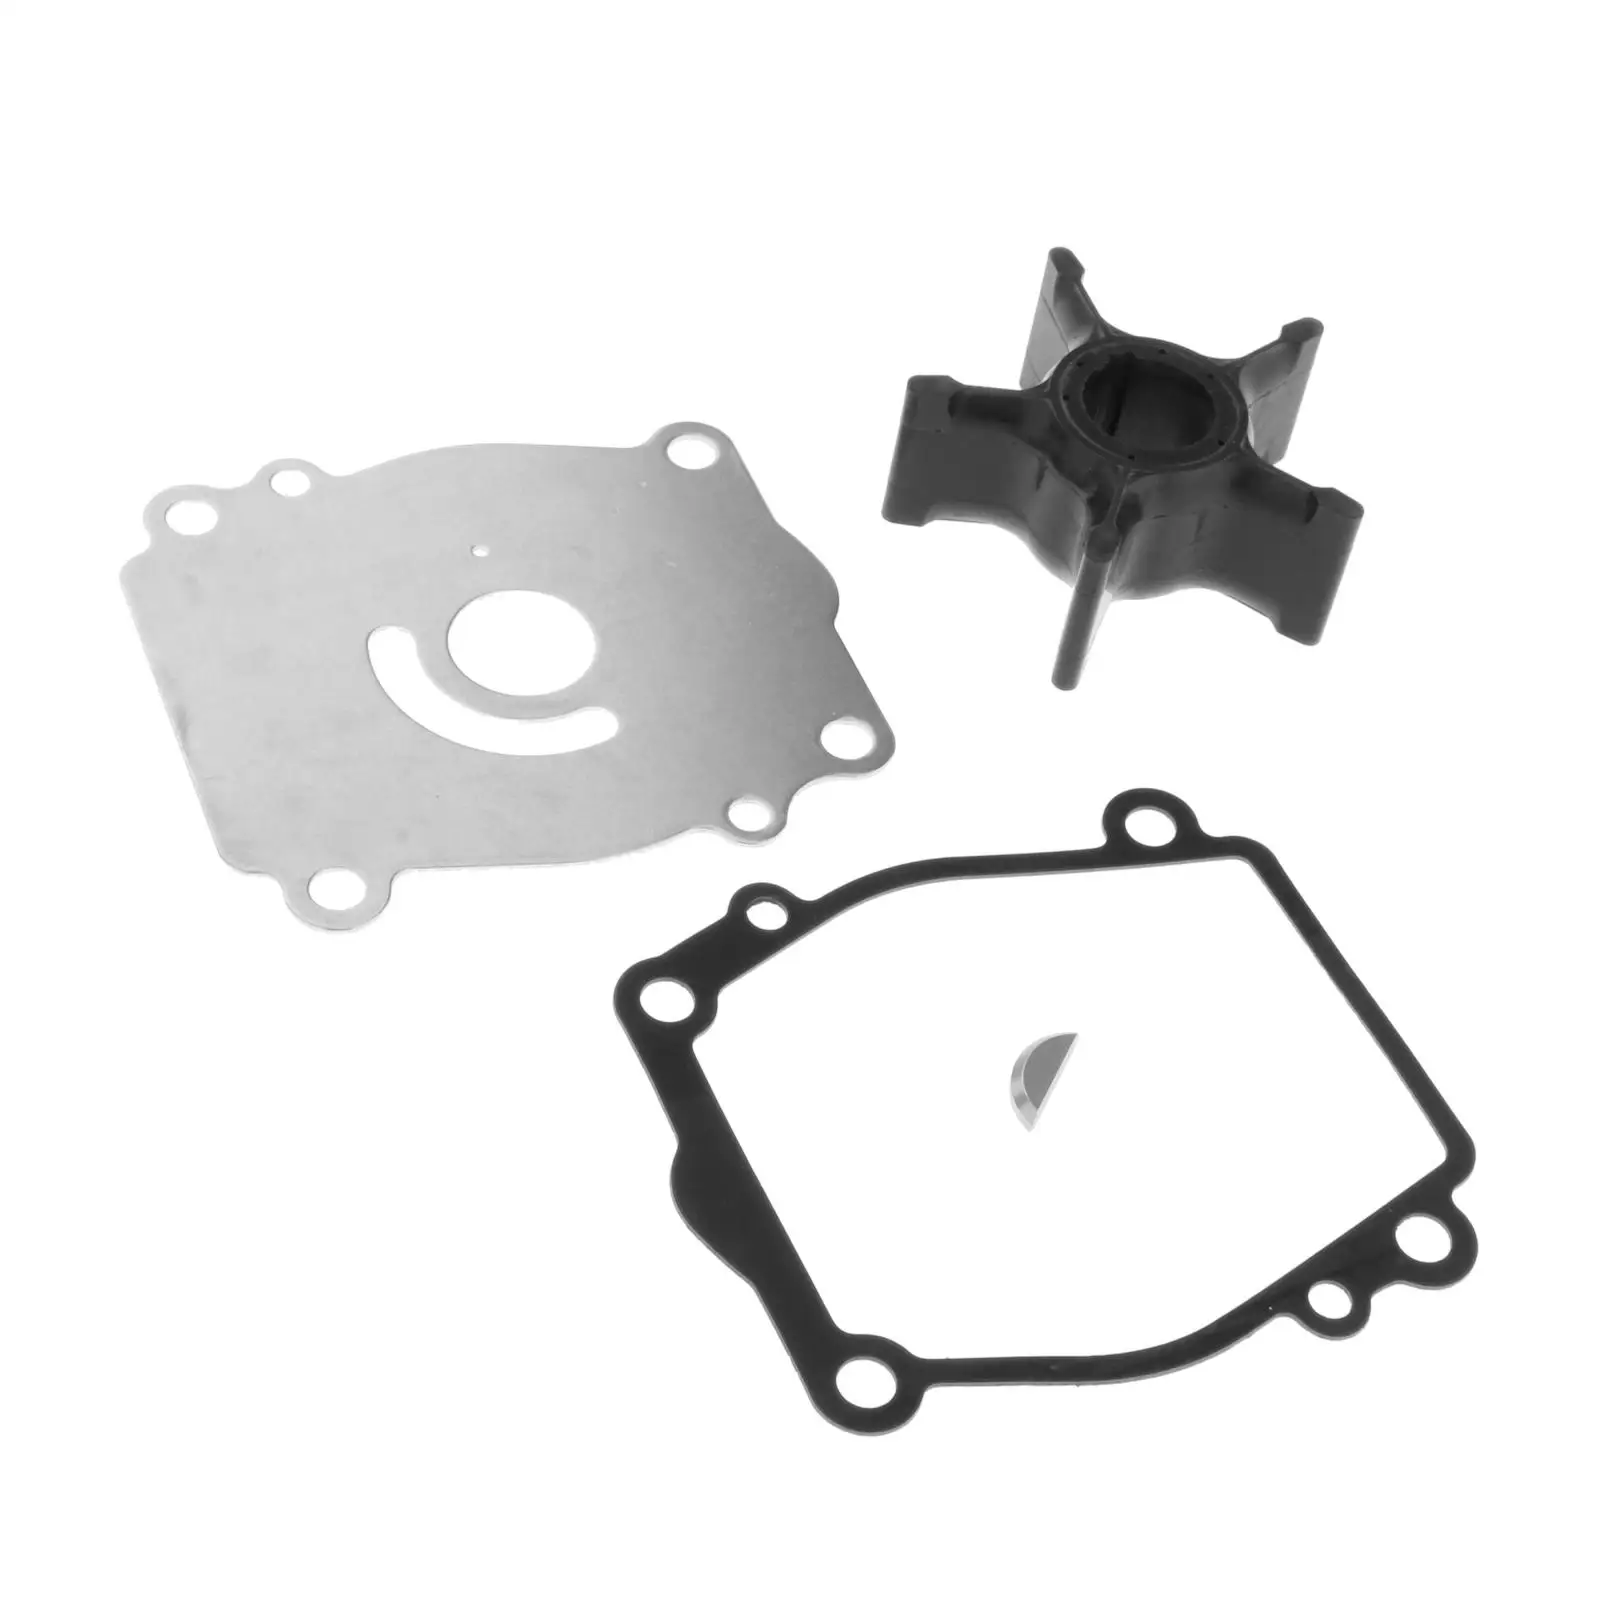 Water Pump Impeller Service Kit Fit for Suzuki Outboard DT150-225 18-3253 17400-87D11 Model Replacement Acc 1 Set